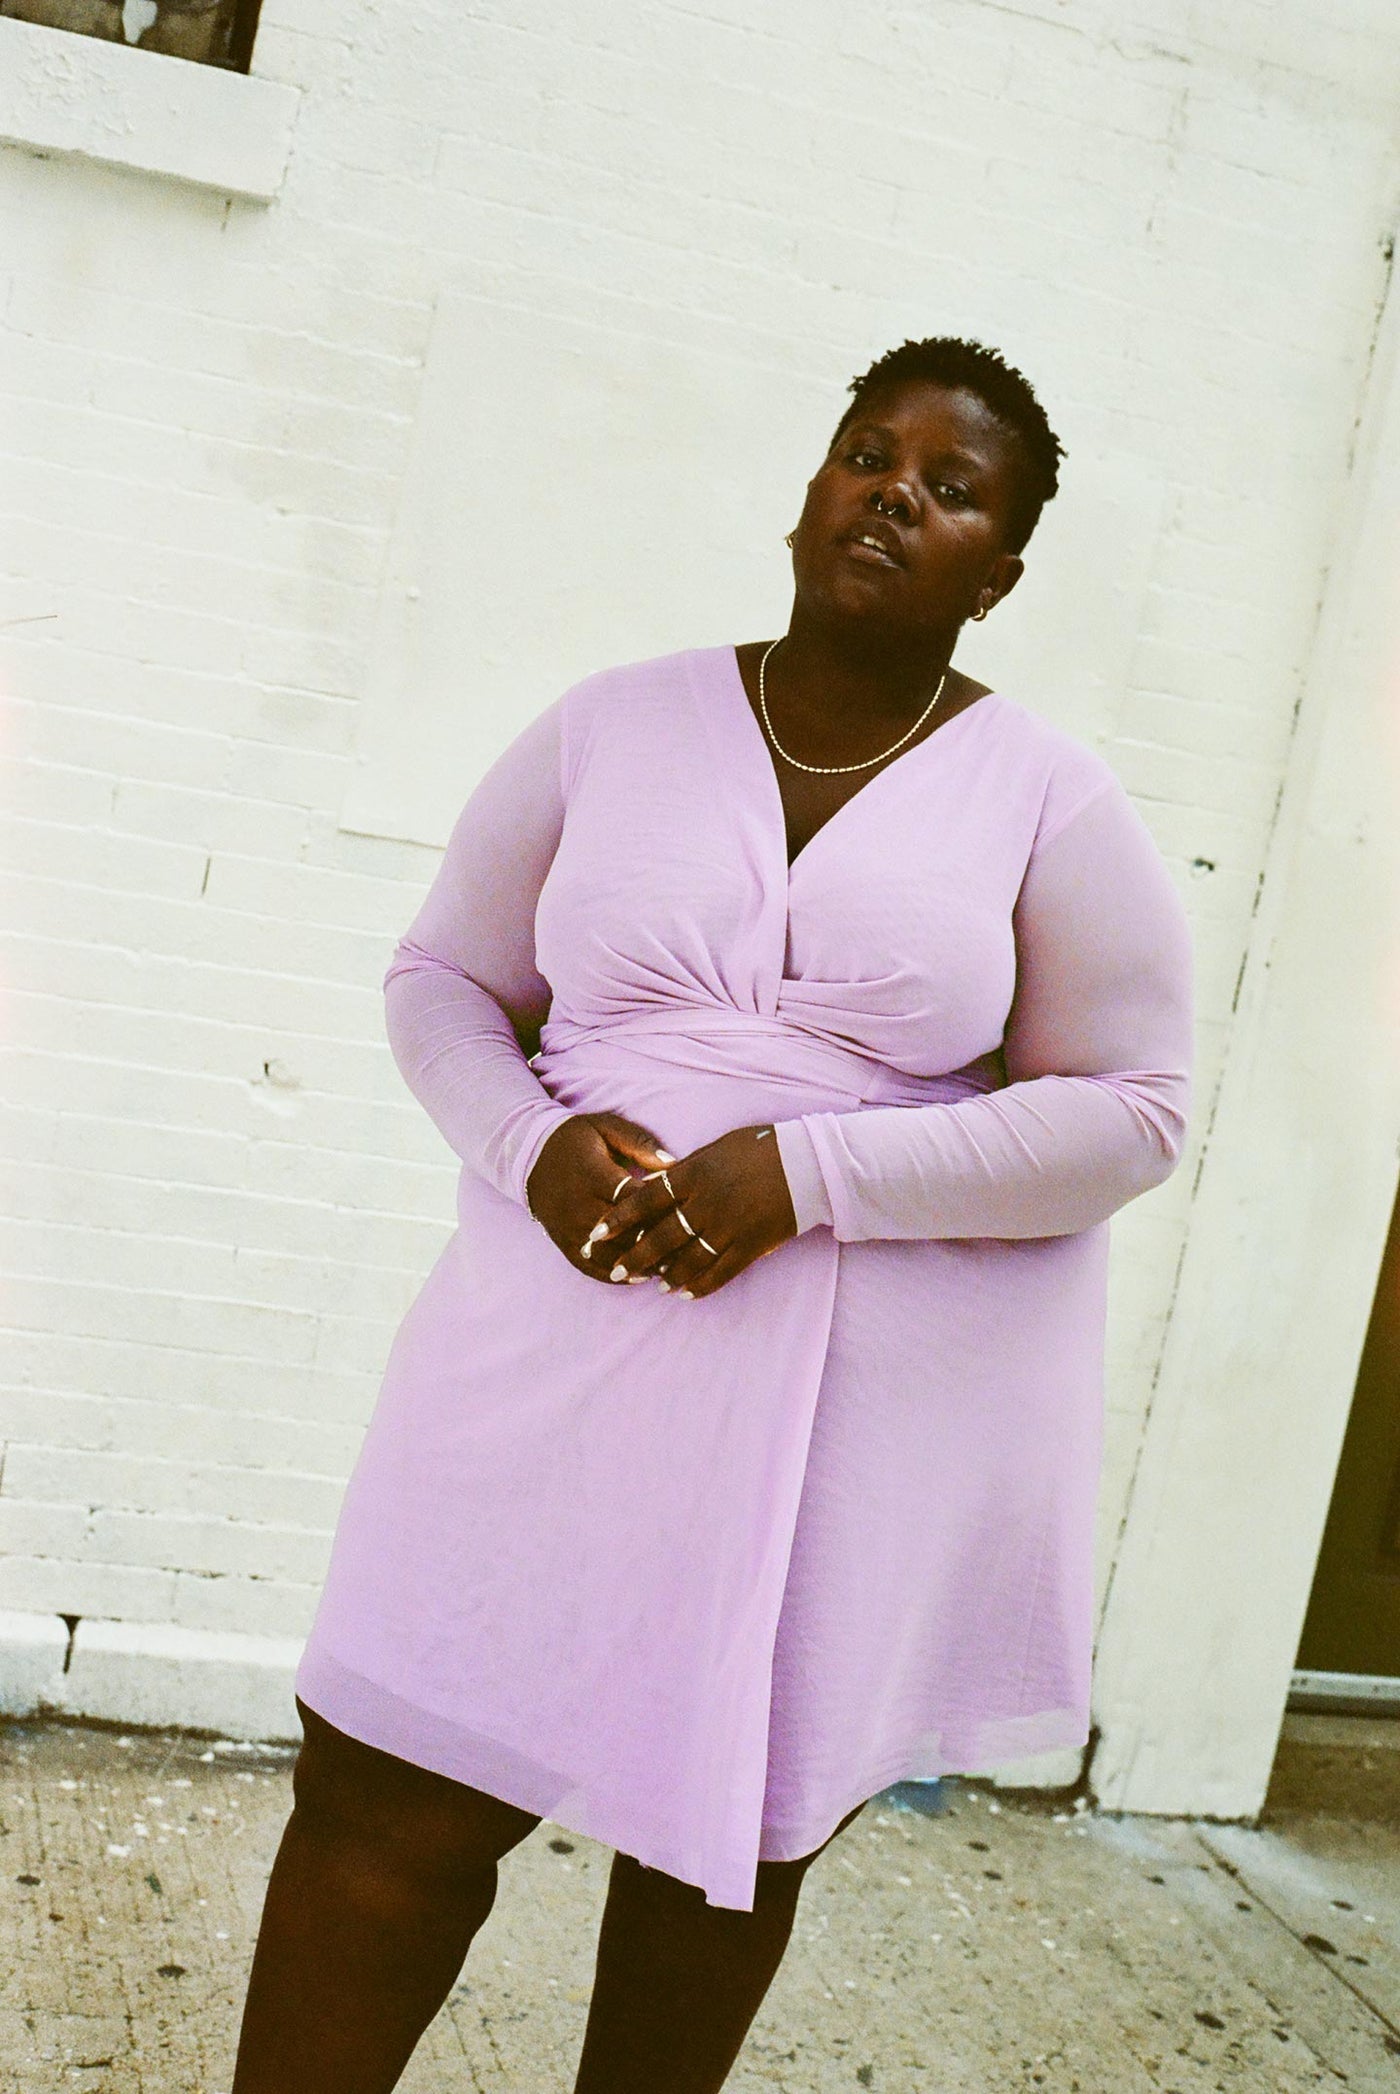 28 Plus Size Wedding Guest Dresses You'll Want To Wear Again